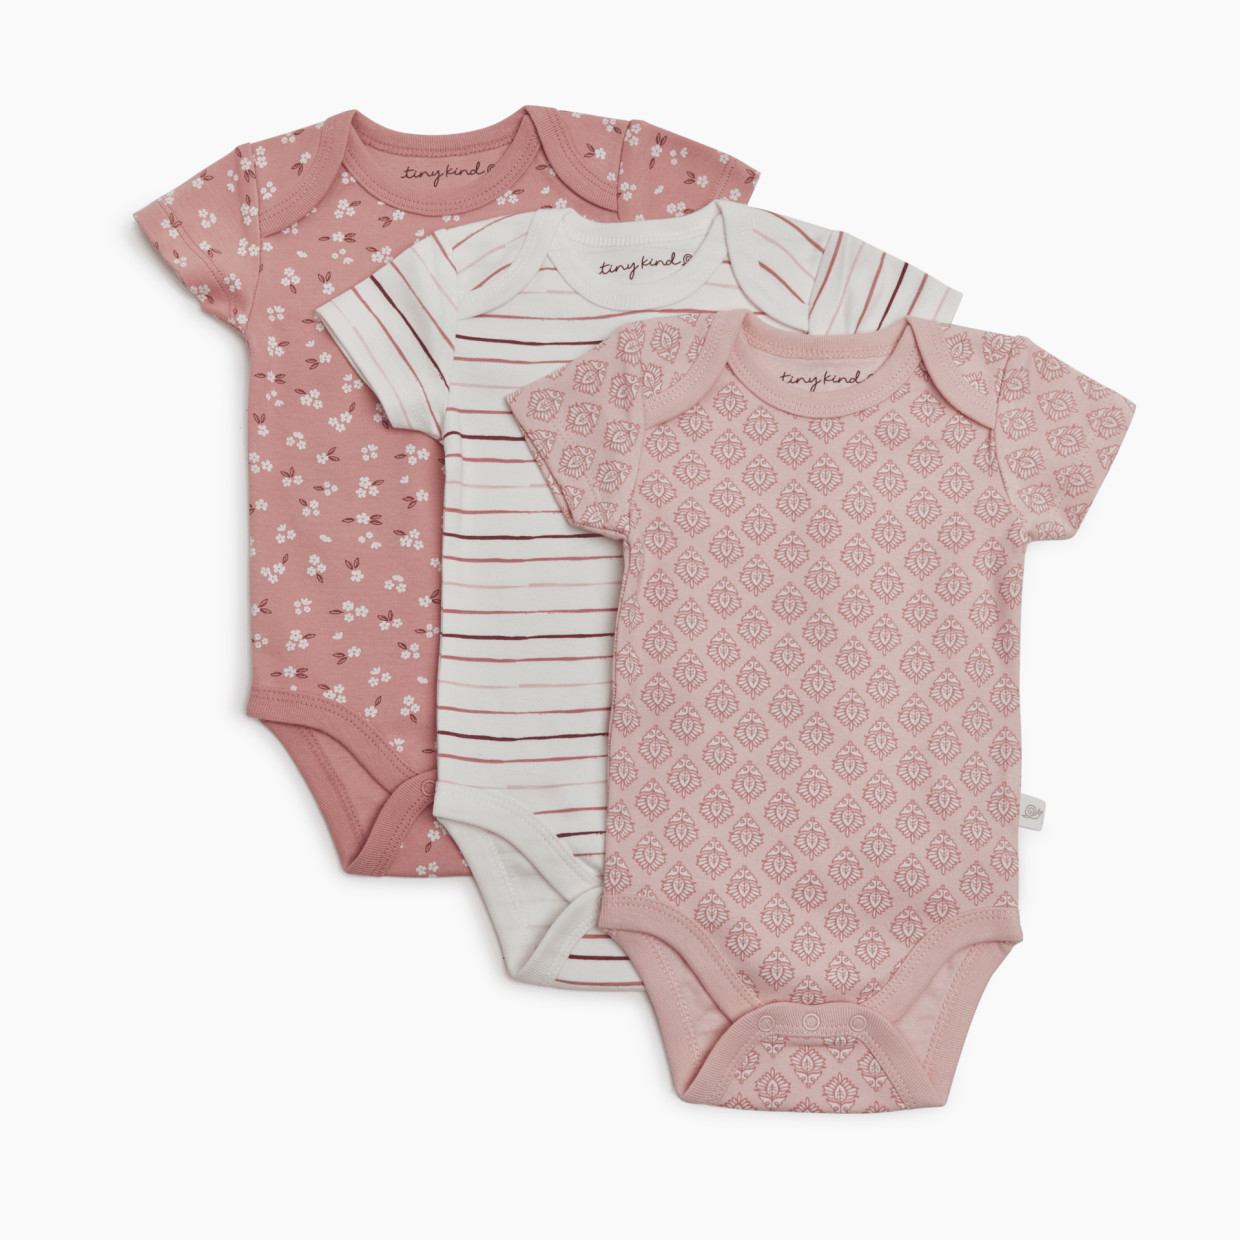 Tiny Kind 3 Pack Assorted Bodysuits - Assorted Pinks, Nb.